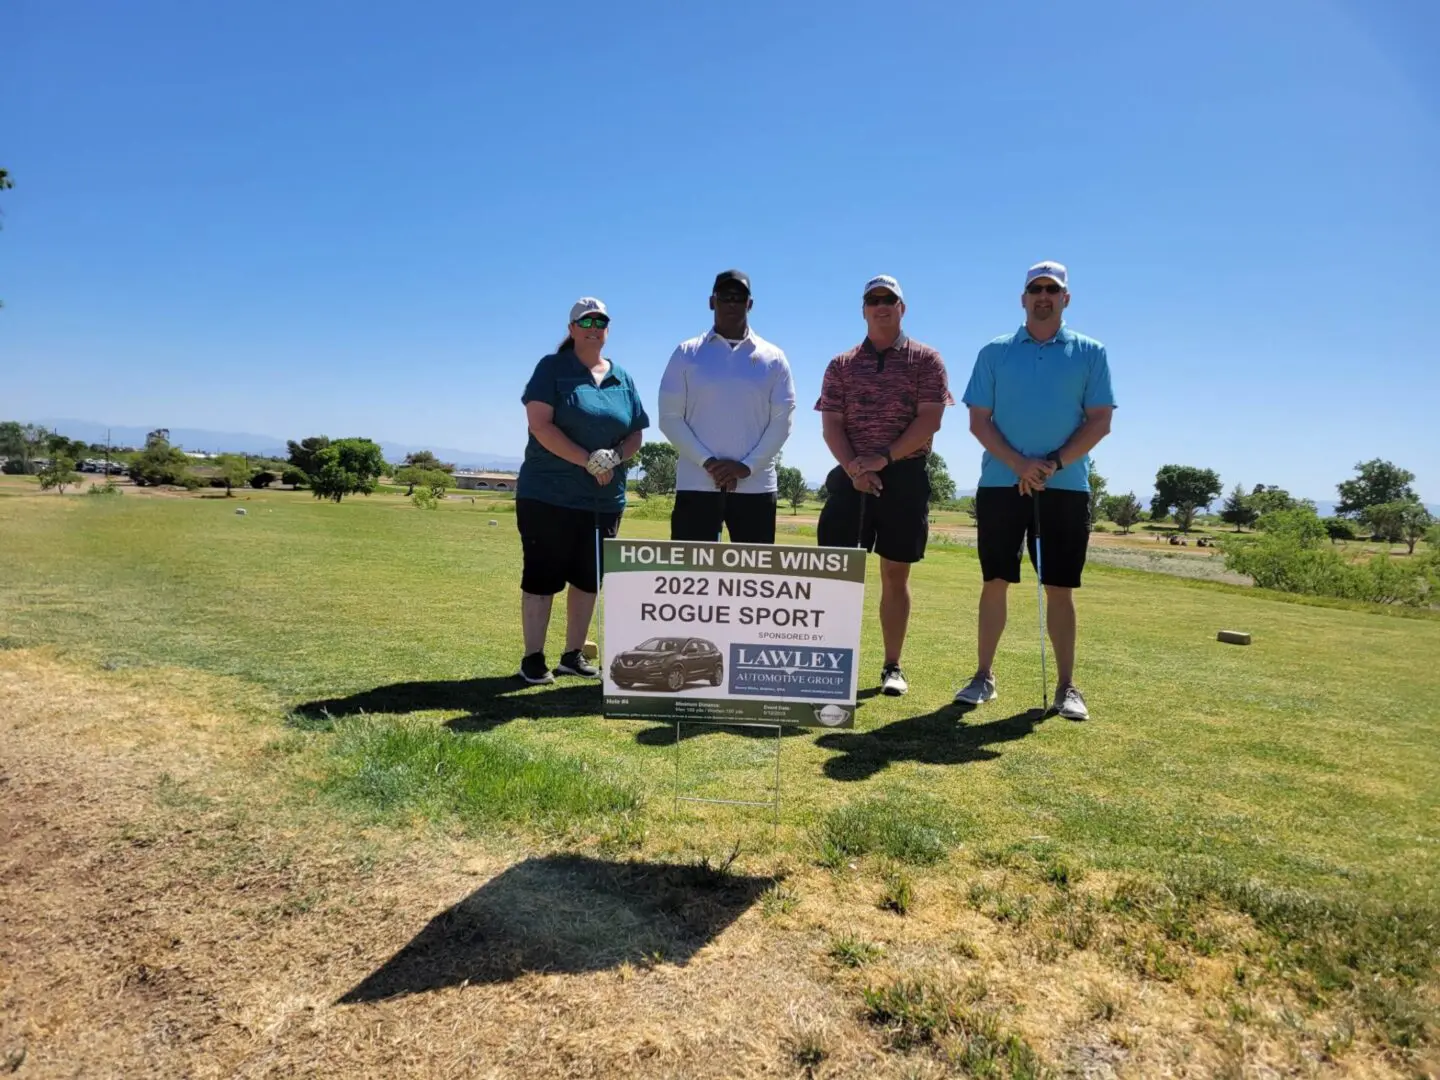 Four men standing in a field holding golf clubs.